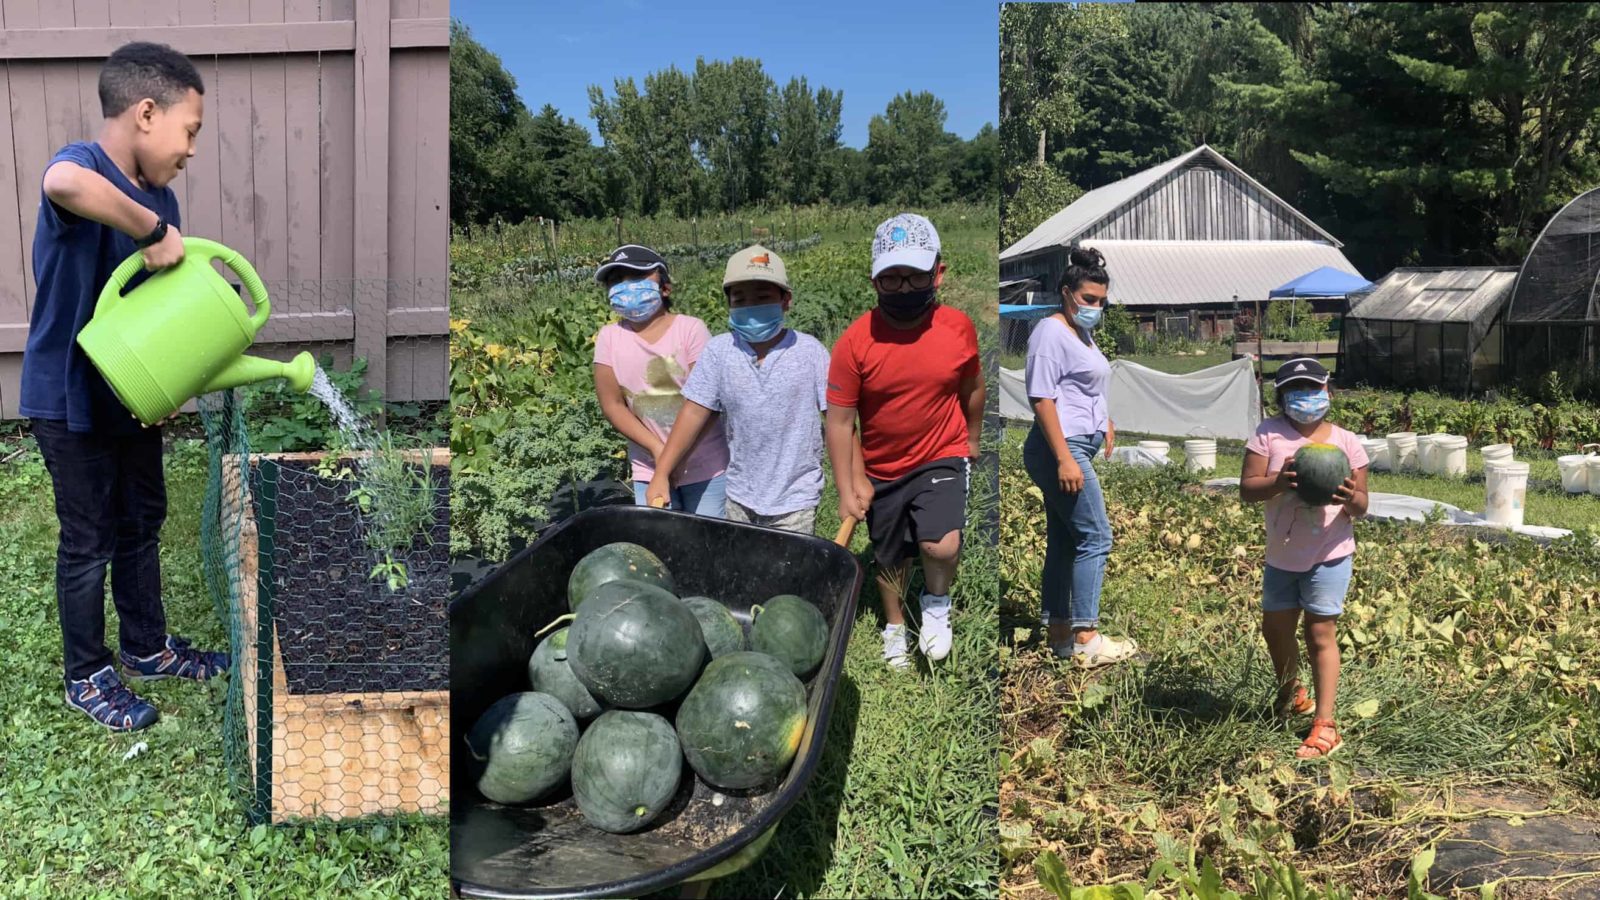 Quinton Hayes waters his plants, and Aylin Lopez tends homegrown watermelons with her older brother, Diego Lopez, and Jonathan Cedeno. Photos courtesy of Multicultural Bridge.